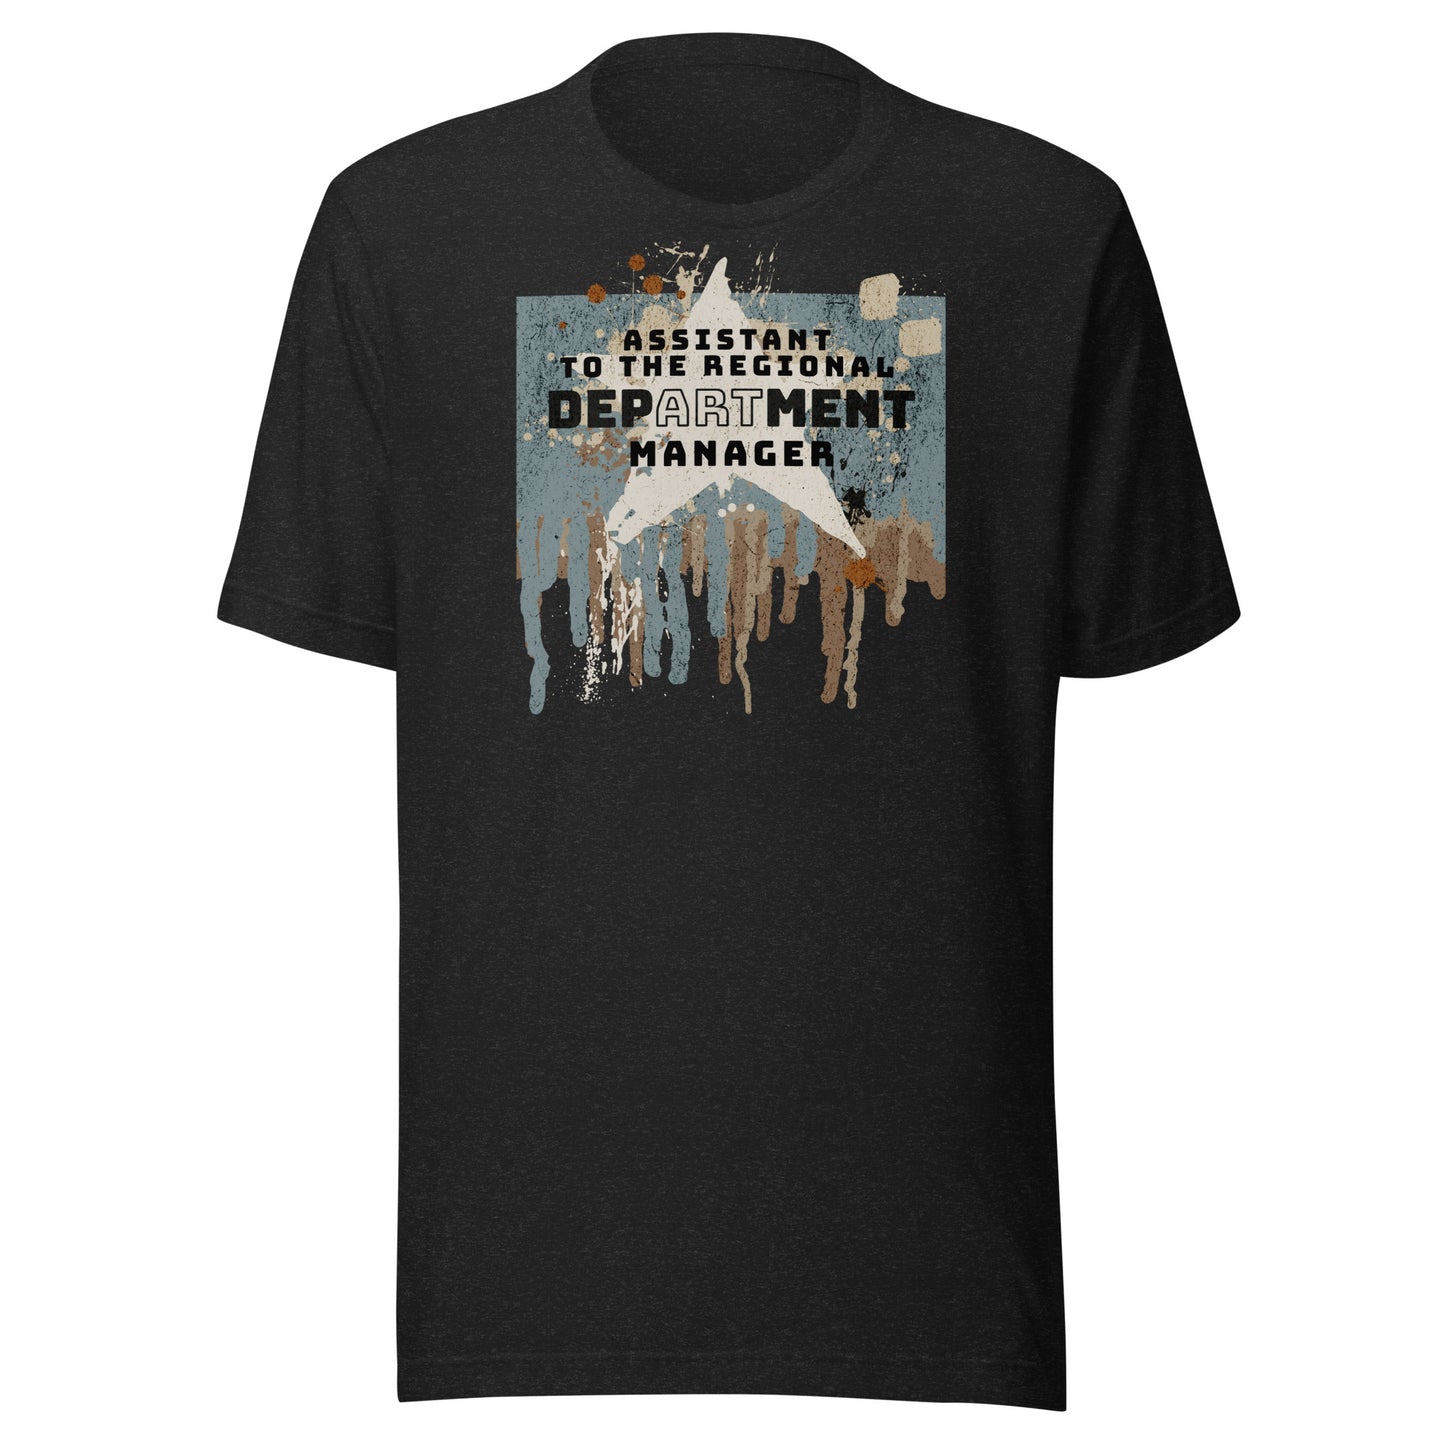 Assistant regional depARTment manager t-shirt